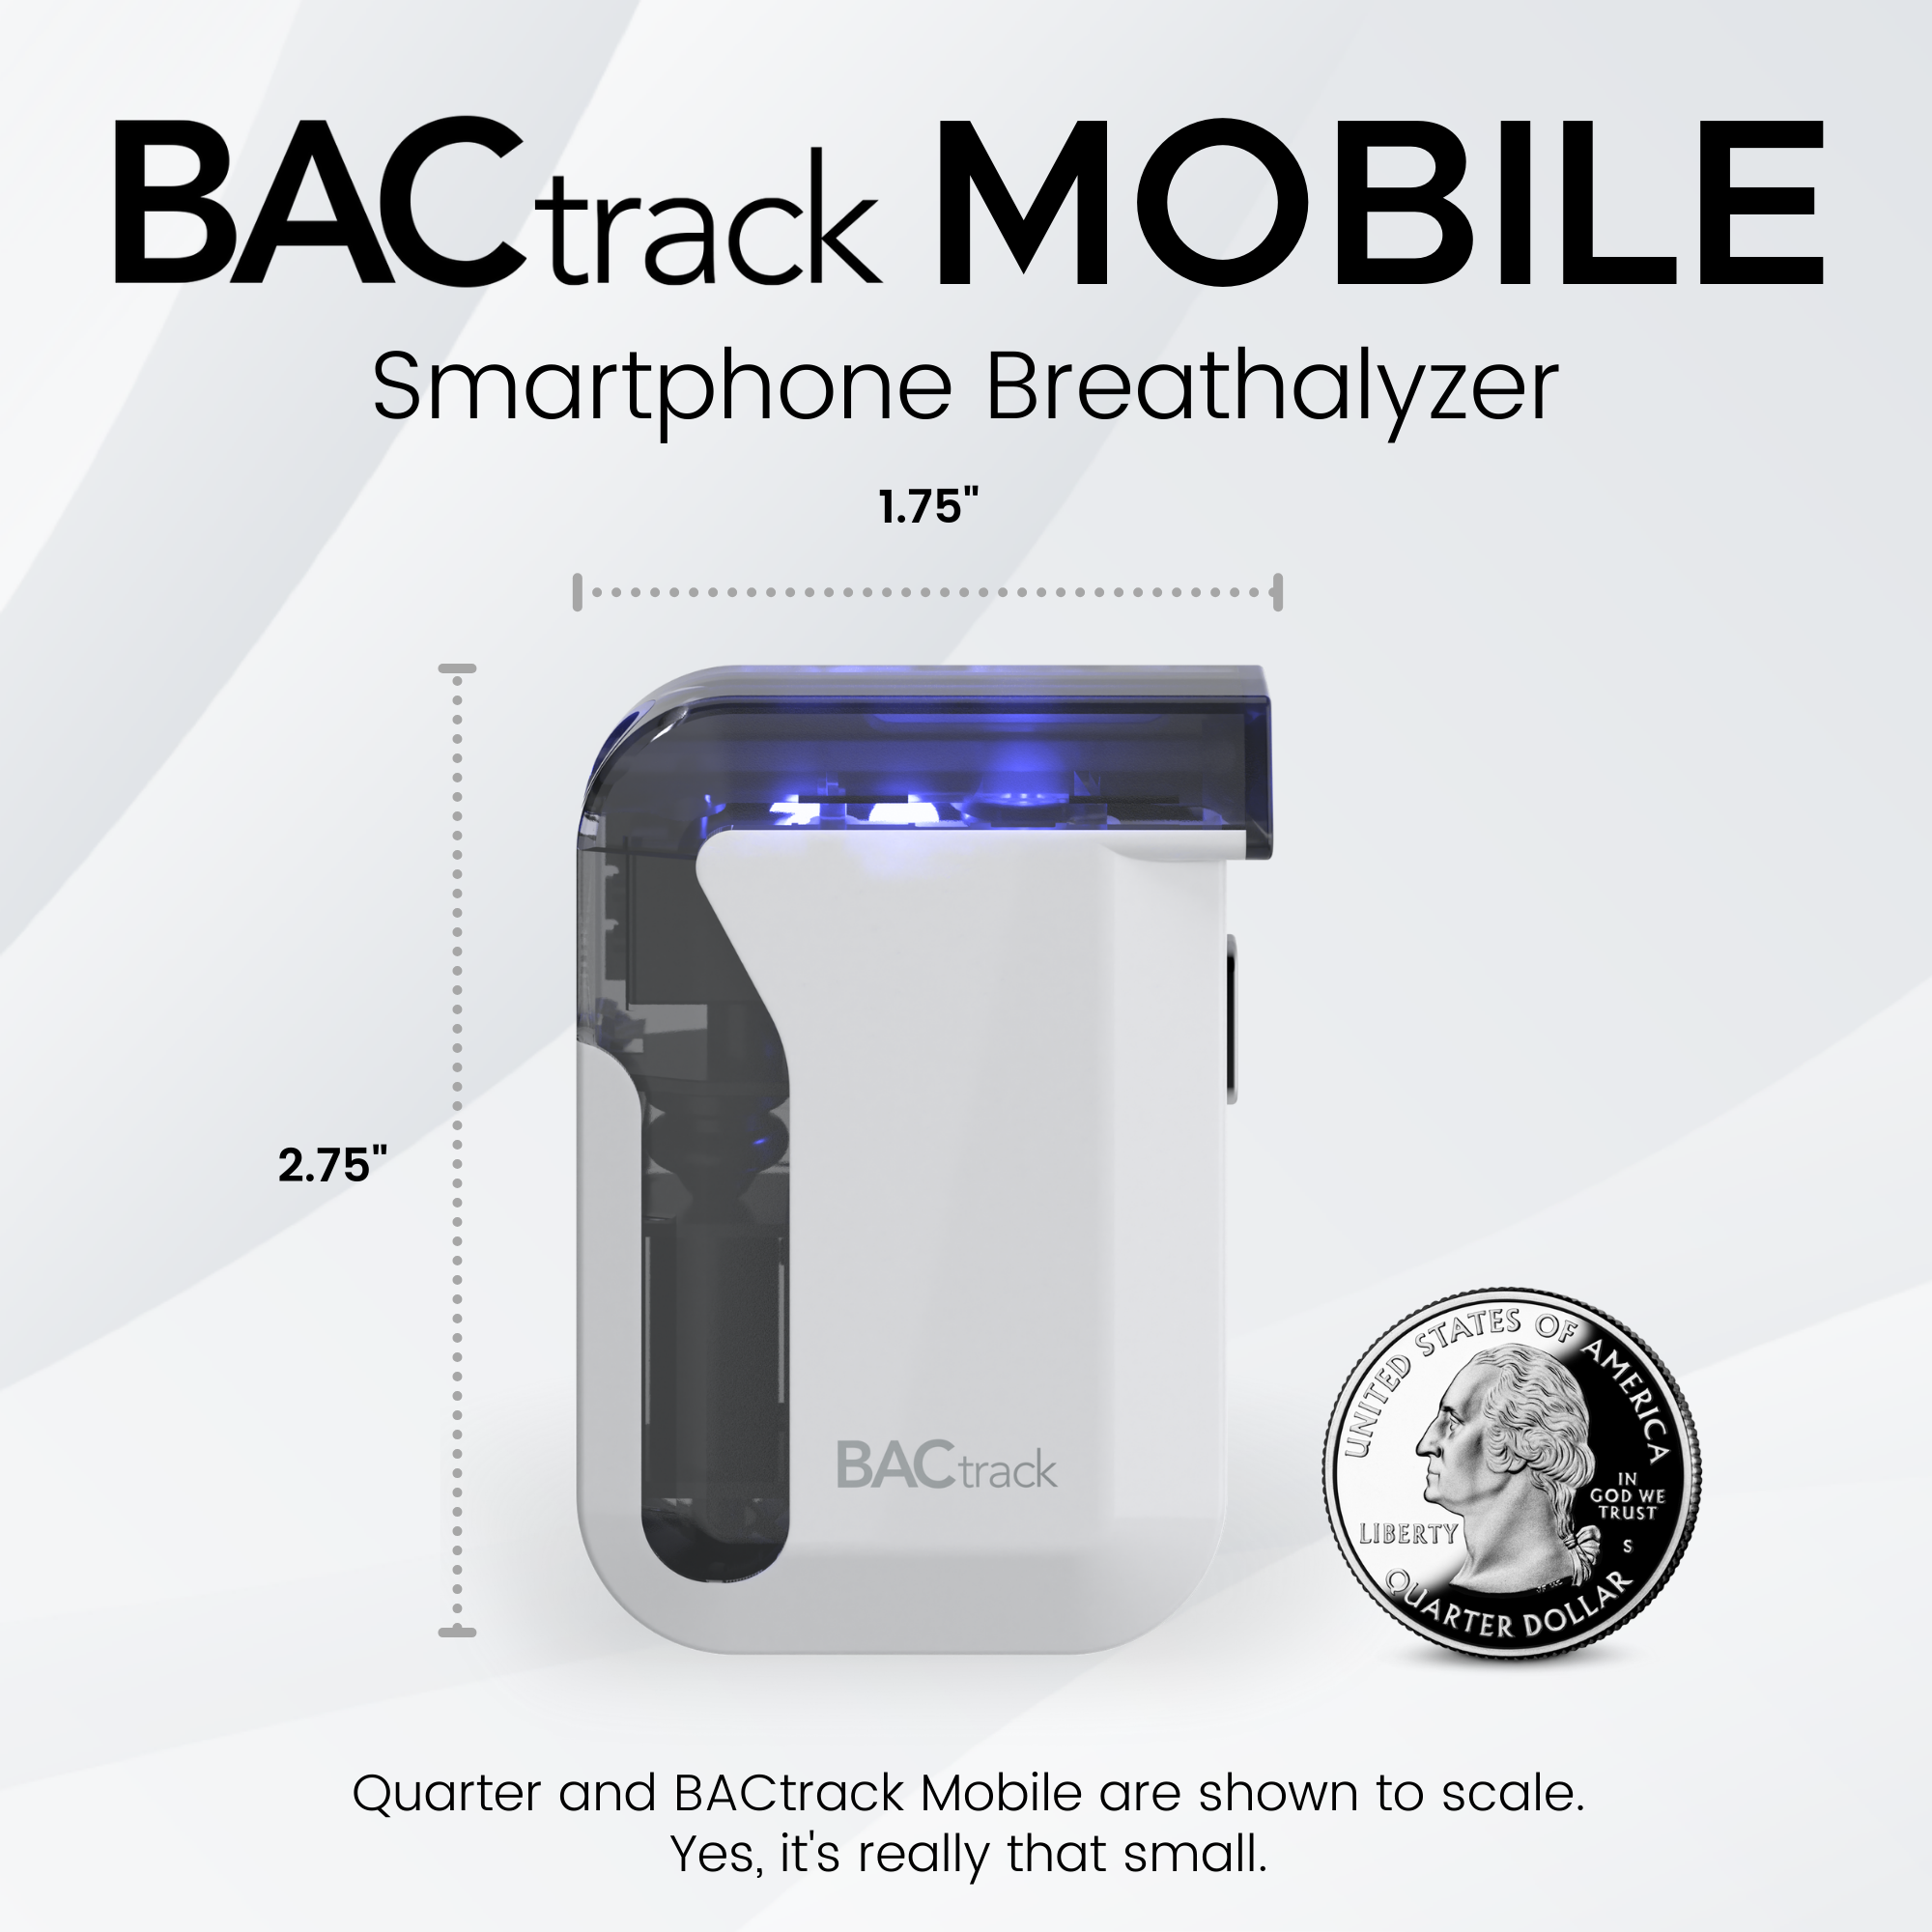 BACtrack Mobile Smartphone Breathalyzer | Professional-Grade Accuracy | Wireless Smartphone Connectivity | Compatible w/ Apple iPhone, Google & Samsung Android Devices | Apple HealthKit Integration - image 2 of 8